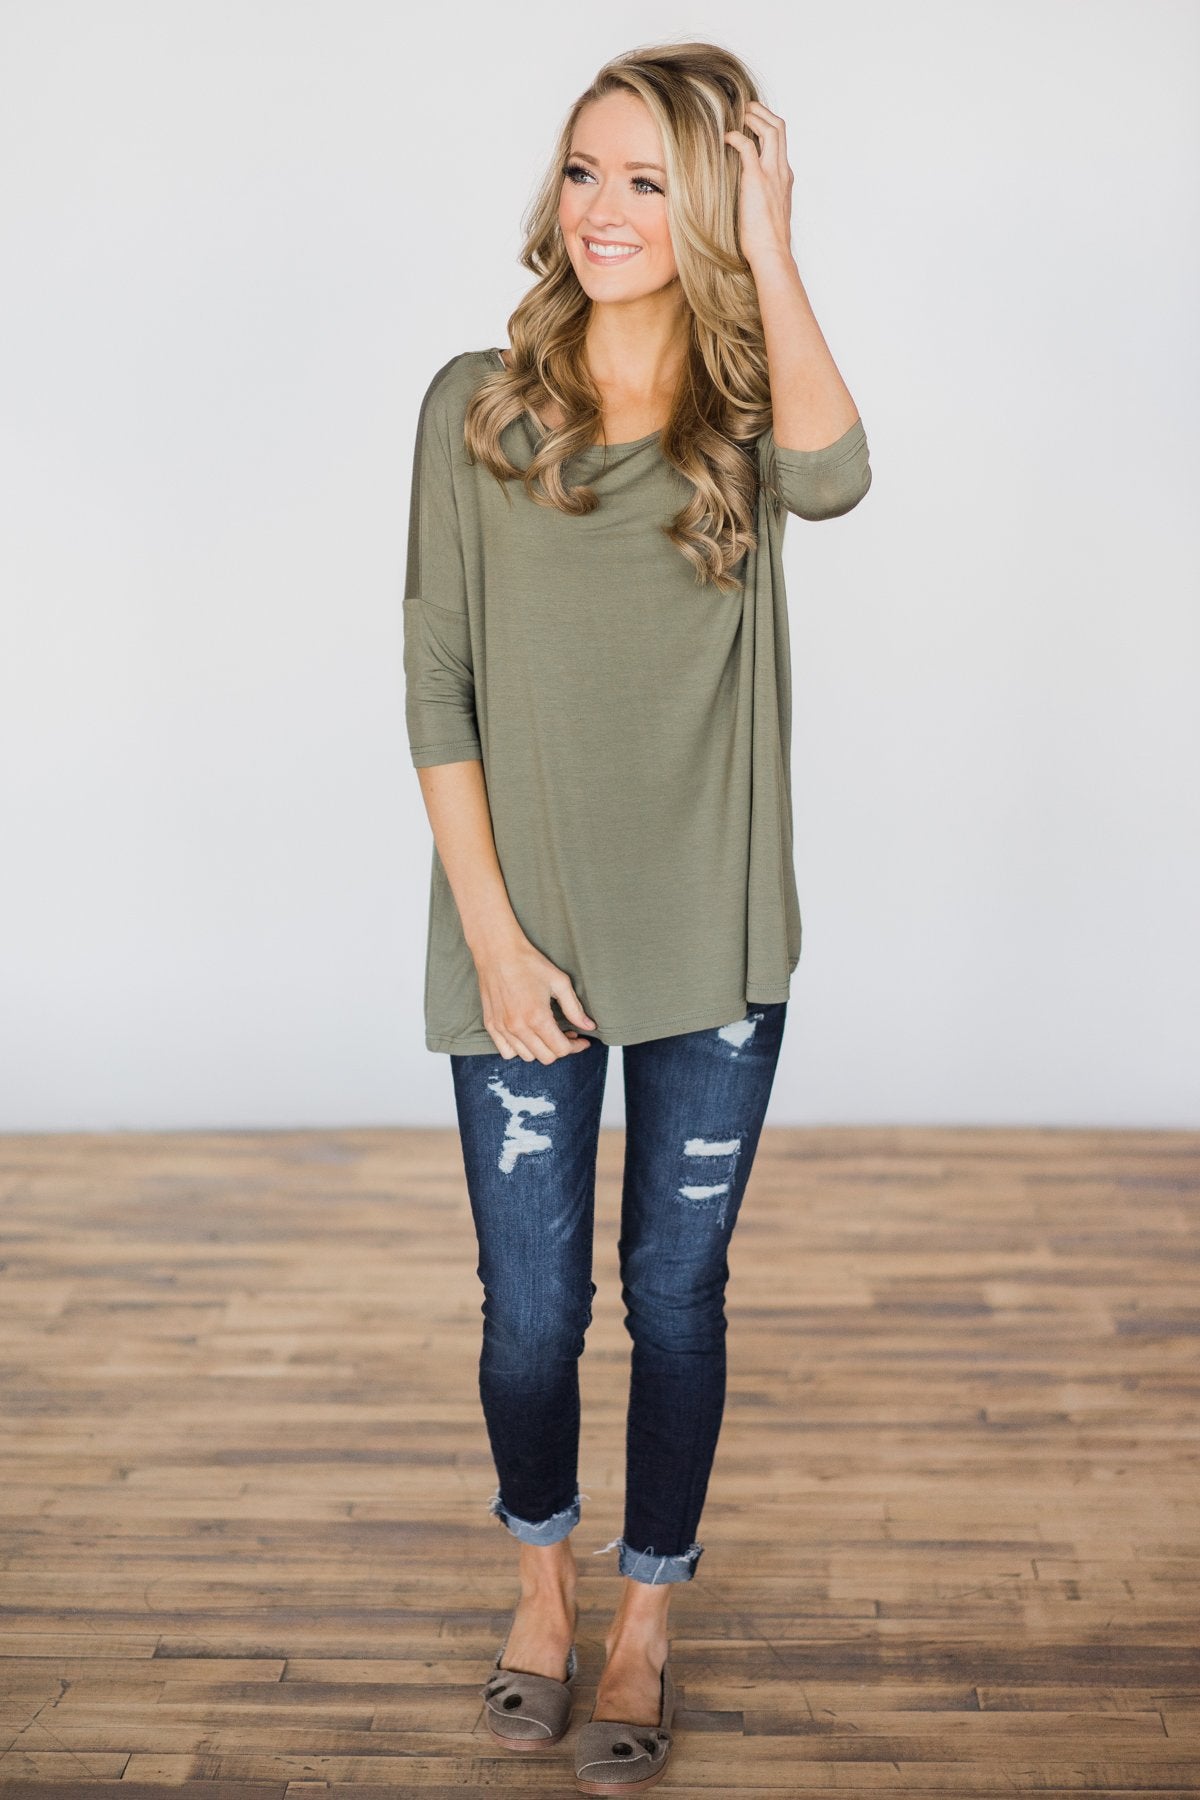 Your Everyday Casual Piko Top - Olive